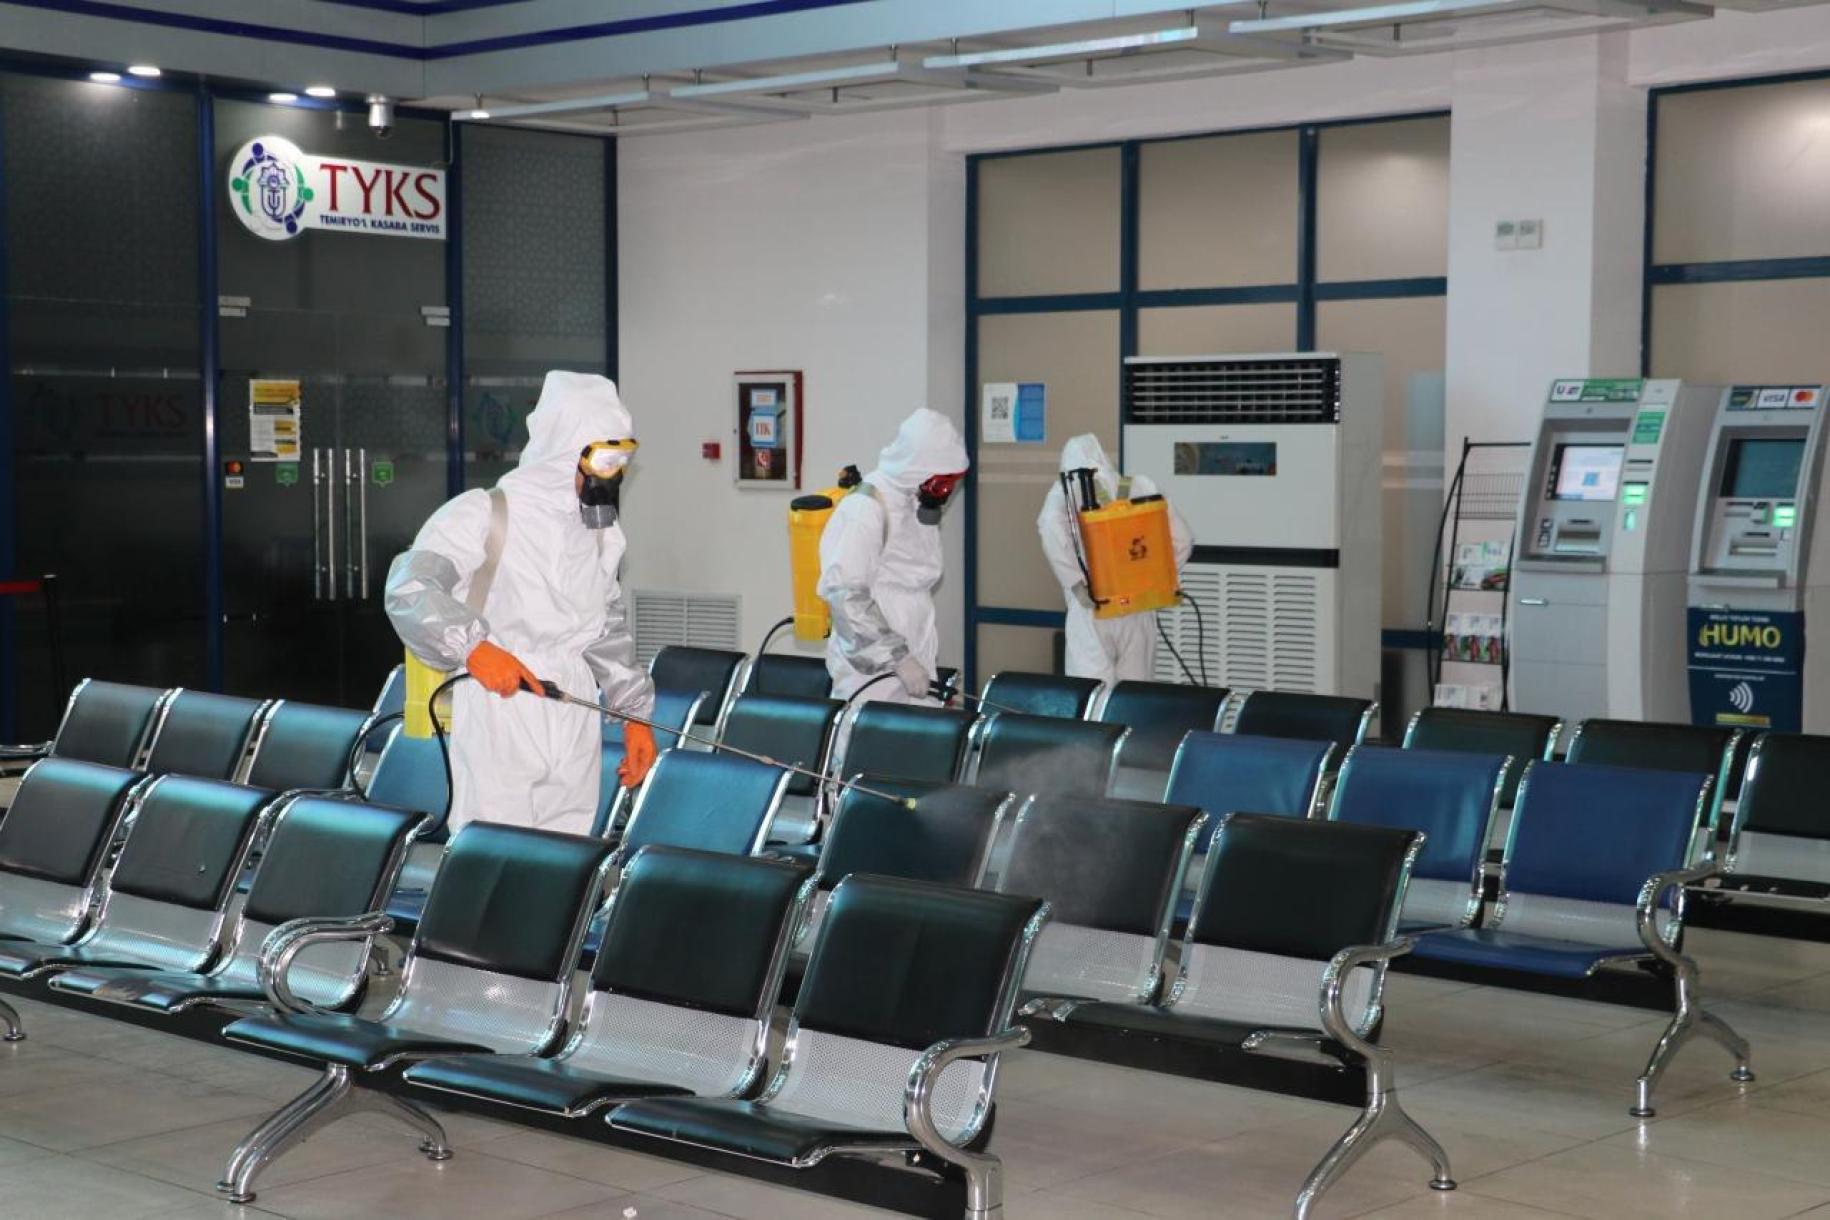 People wearing head-to-toe protective gear are shown cleaning and sanitizing a waiting area.